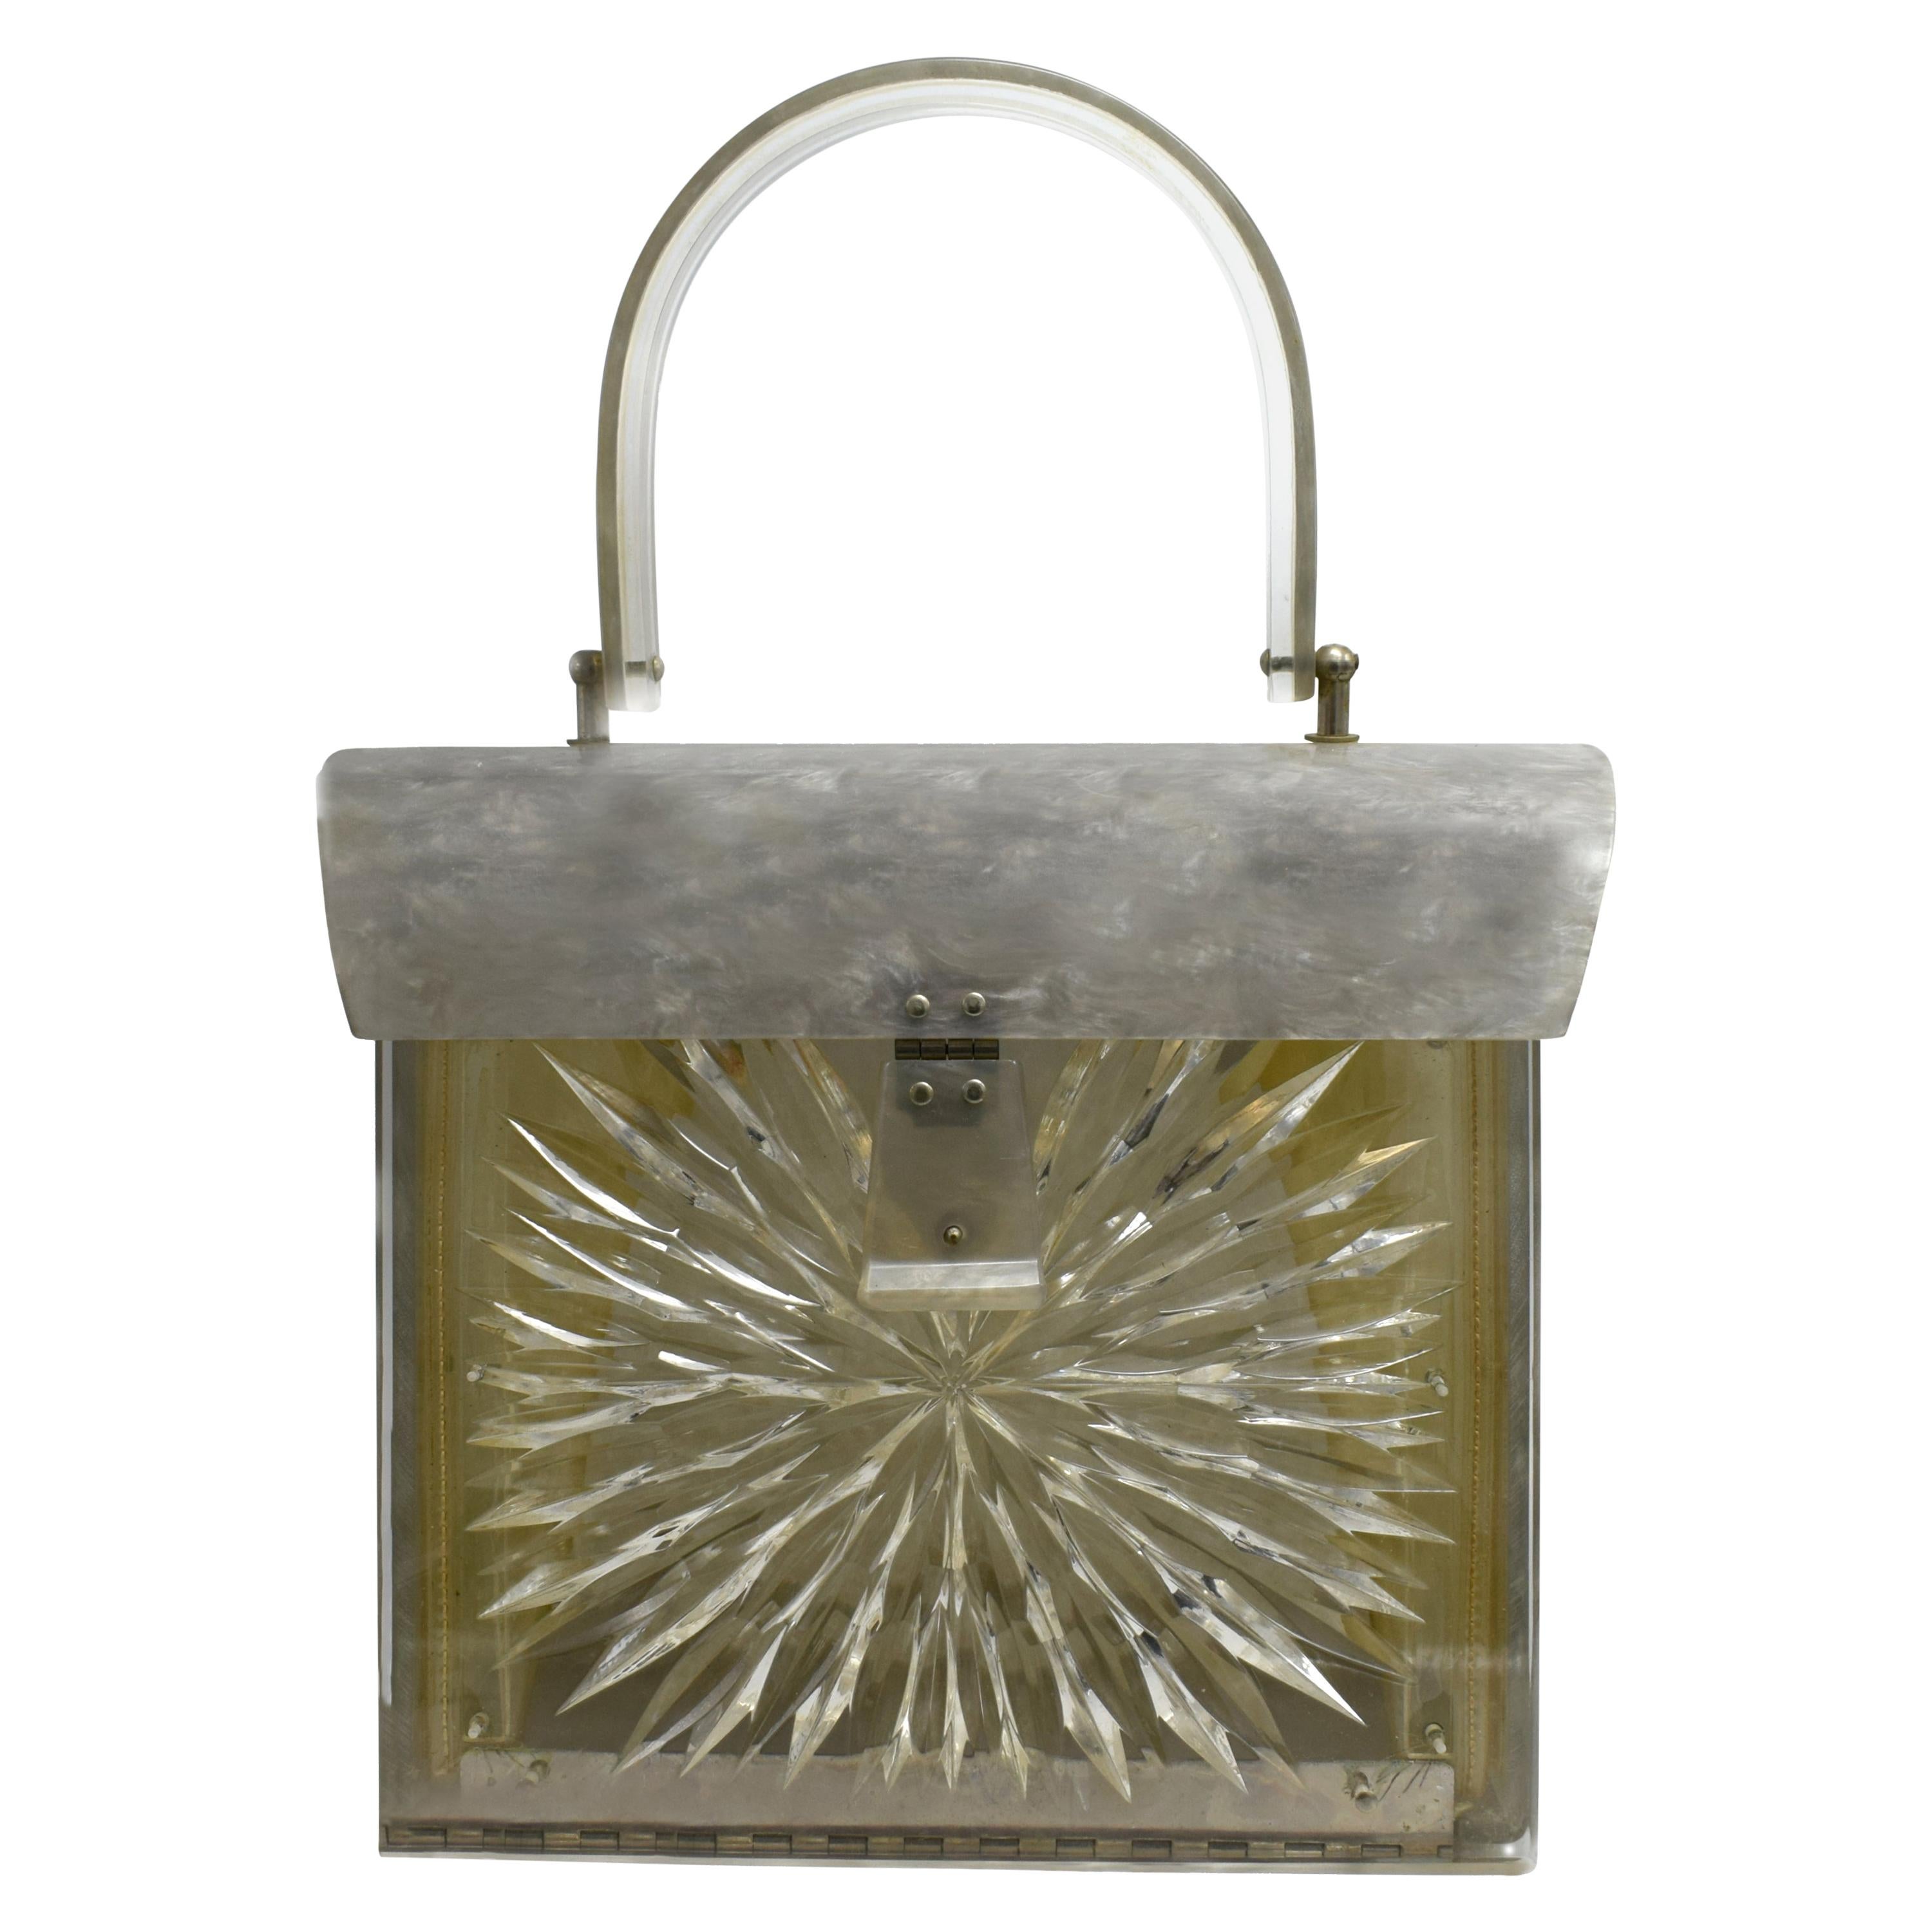 Ladies Lucite Bag by Gilli of New York, circa 1950s